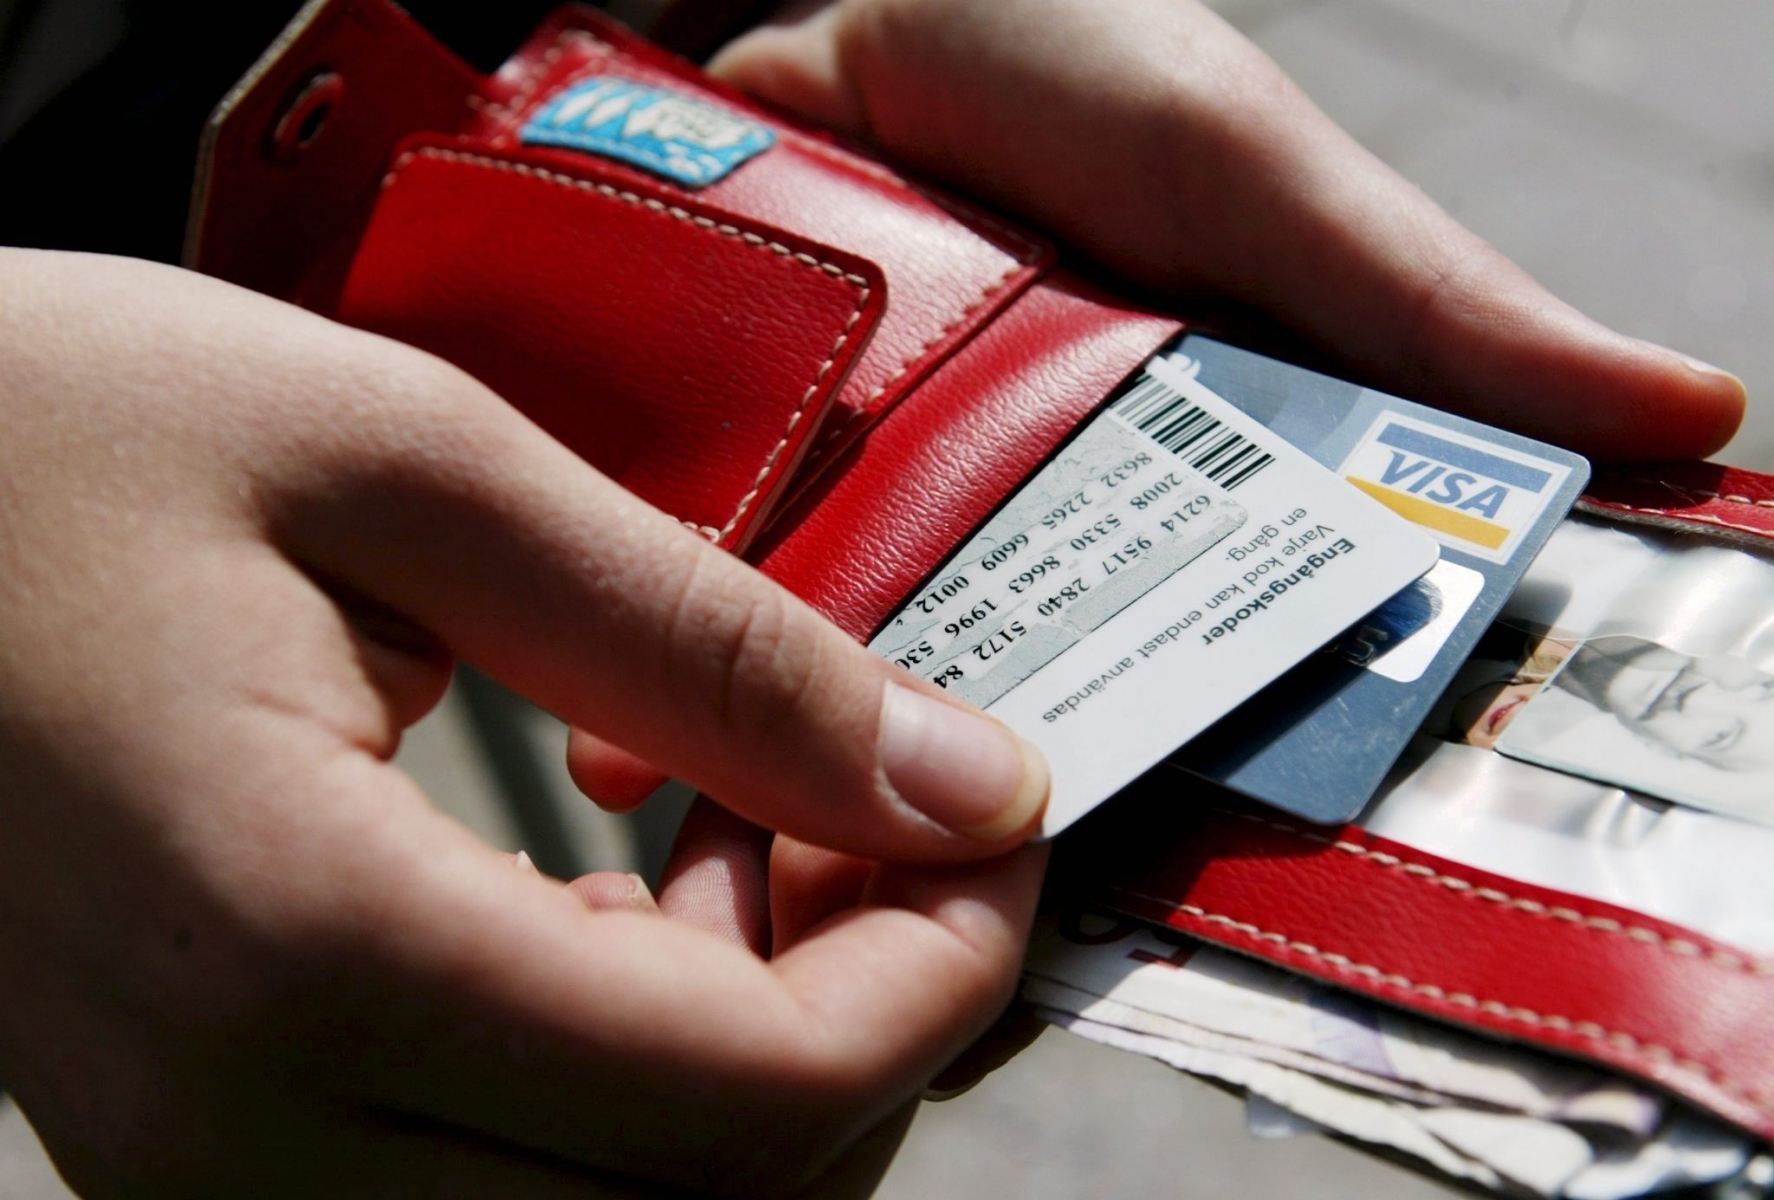 Cartes de credit

Marie Jubran takes out a card with scratch-off codes from her wallet in Stockholm in this May 27, 2004 file photo.   To access her bank acccount online, she types in her Swedish national ID number, a four-digit password and then a code from her scratch-off card. (KEYSTONE/AP Photo/Henrik Montgomery)


